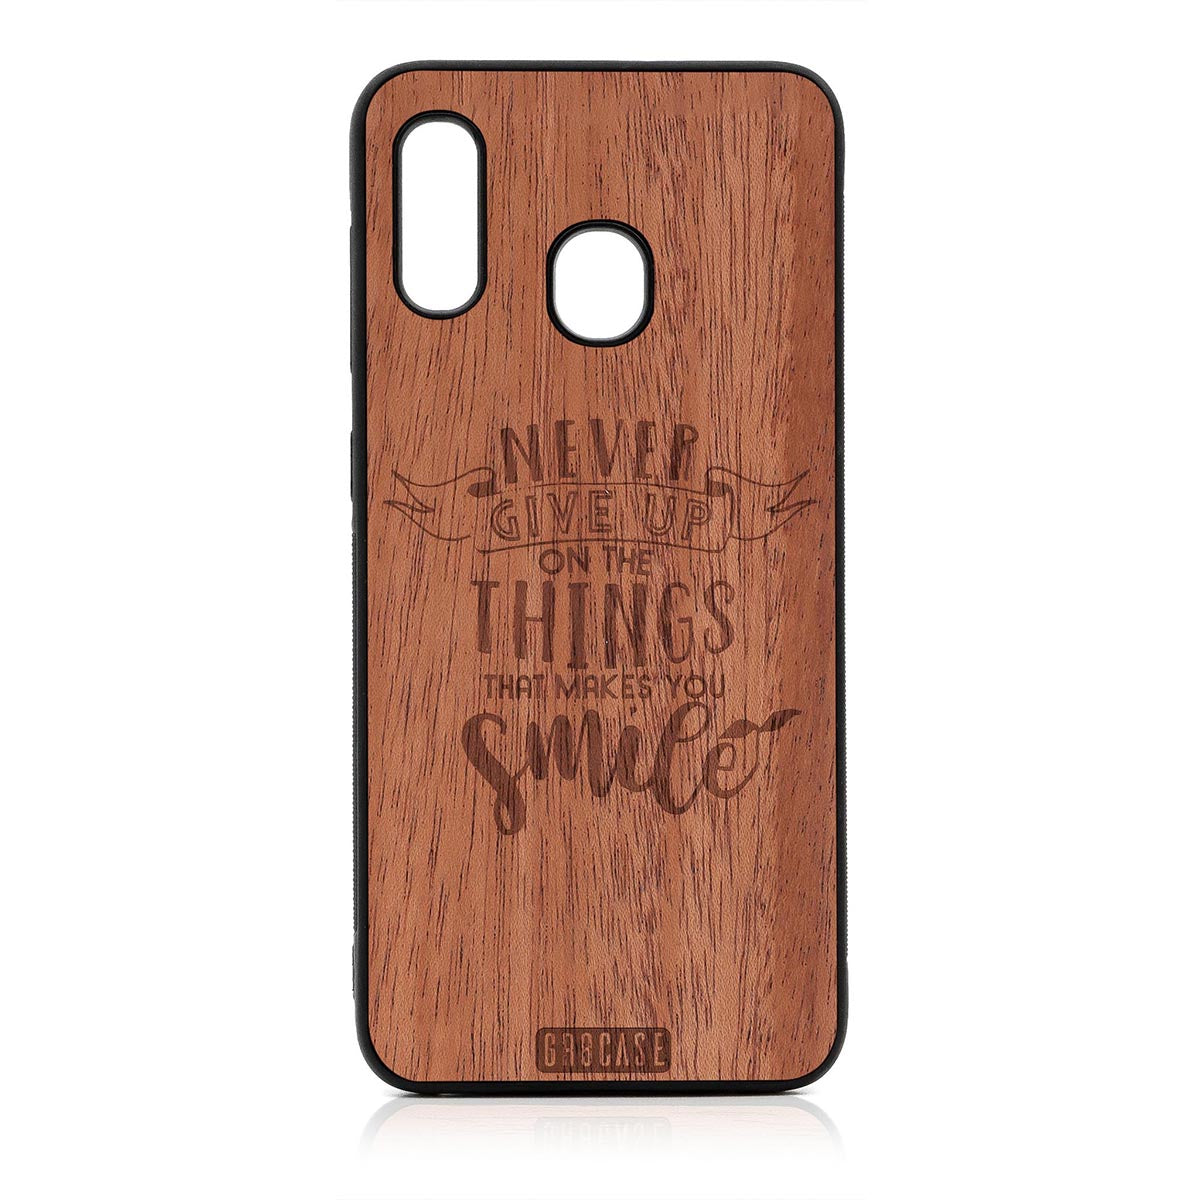 Never Give Up On The Things That Makes You Smile Design Wood Case For Samsung Galaxy A20 by GR8CASE